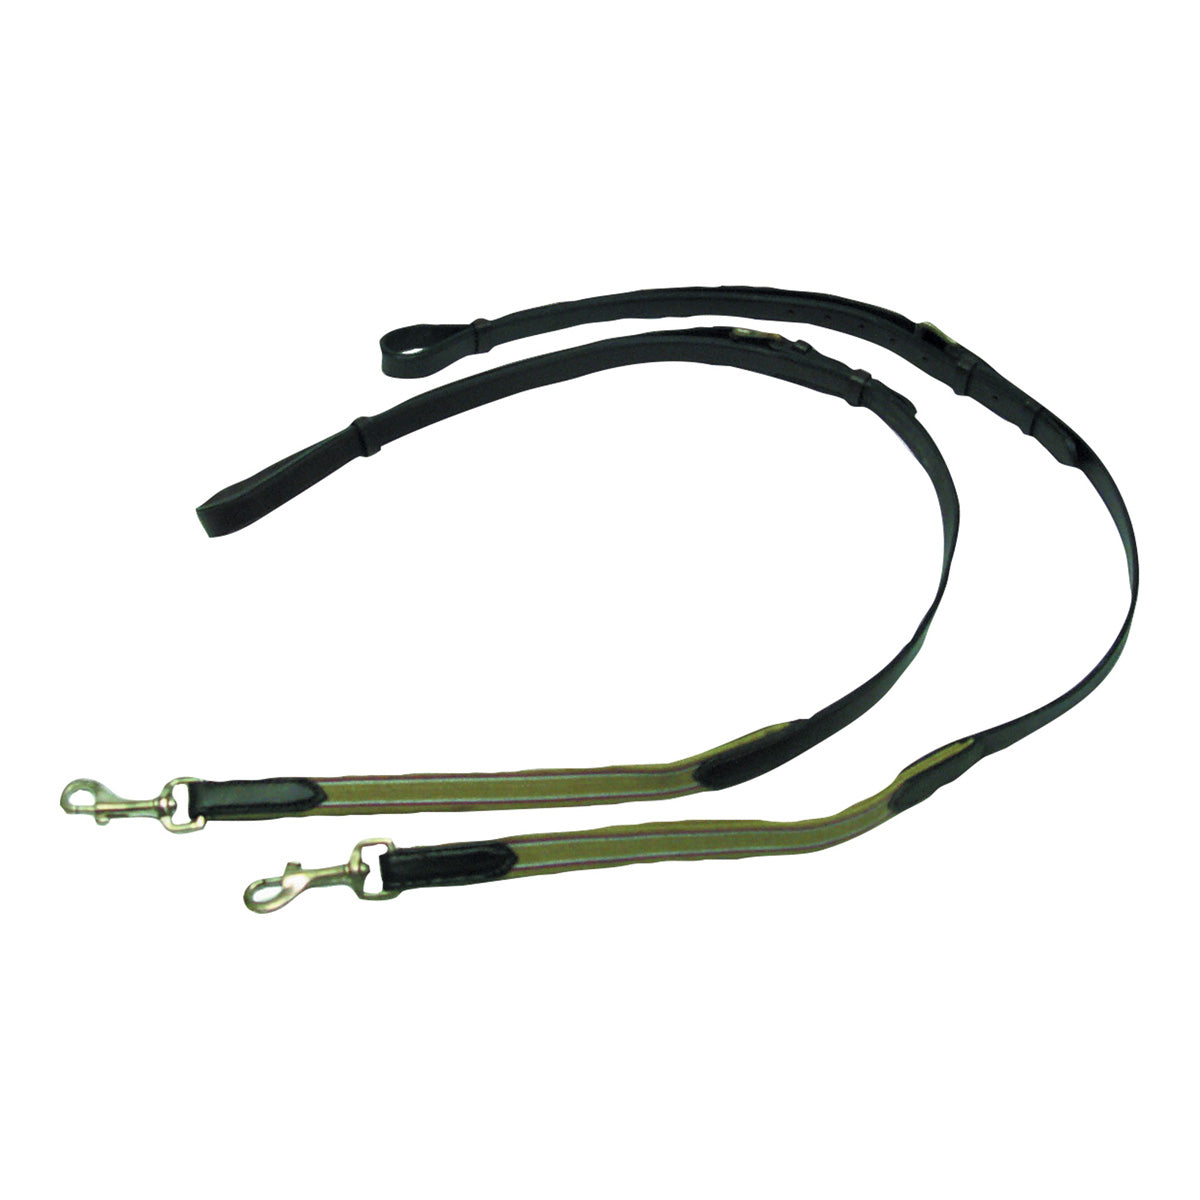 EUREKA BRIDLES & STRAPPING Leather Side Reins With Elastic